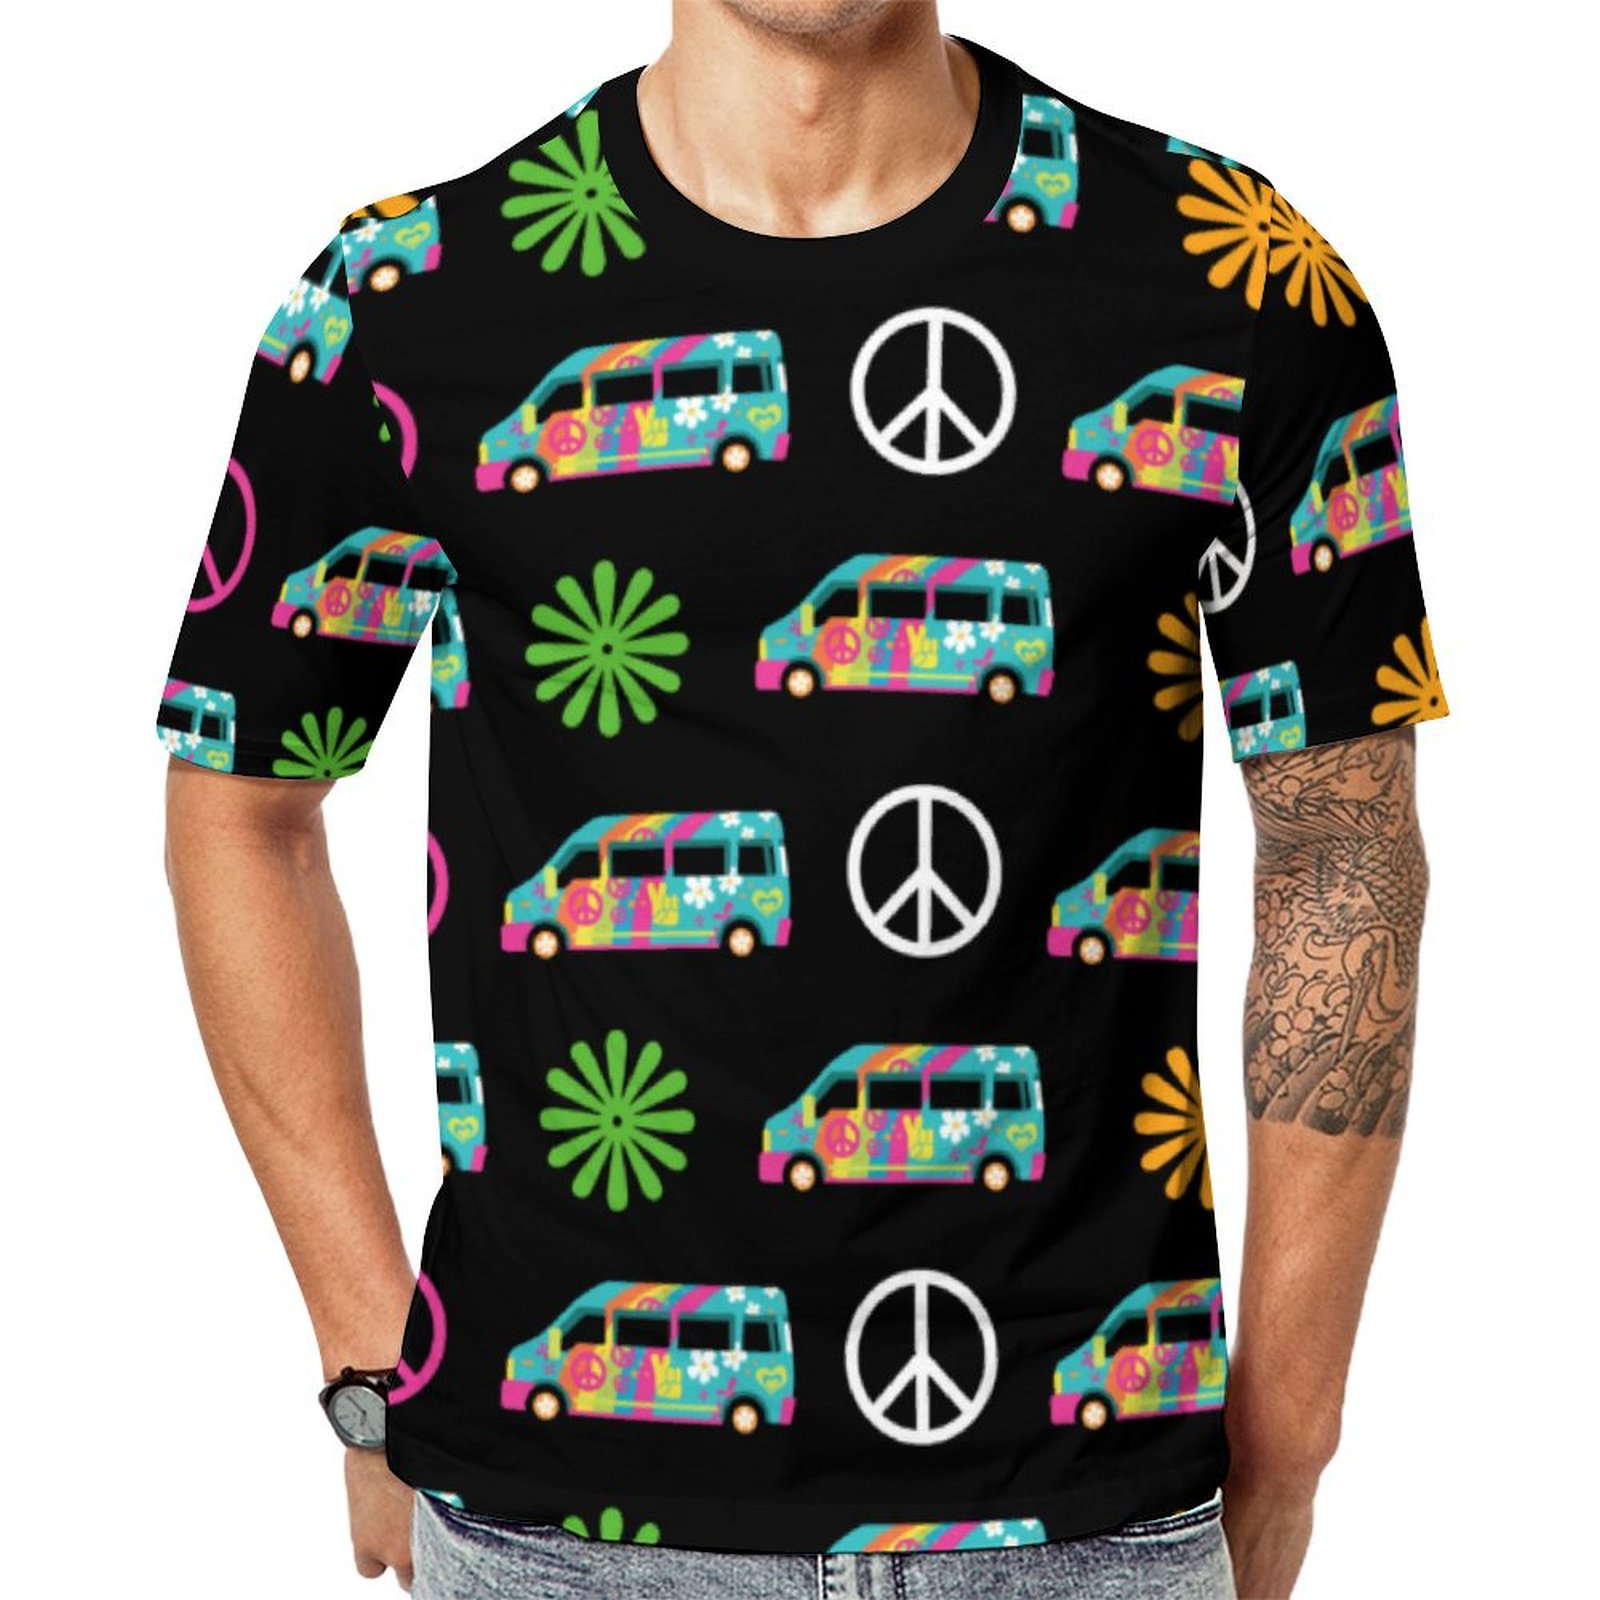 Hippie Bus Peace Sign 70S Car Short Sleeve Print Unisex Tshirt Summer Casual Tees for Men and Women Coolcoshirts